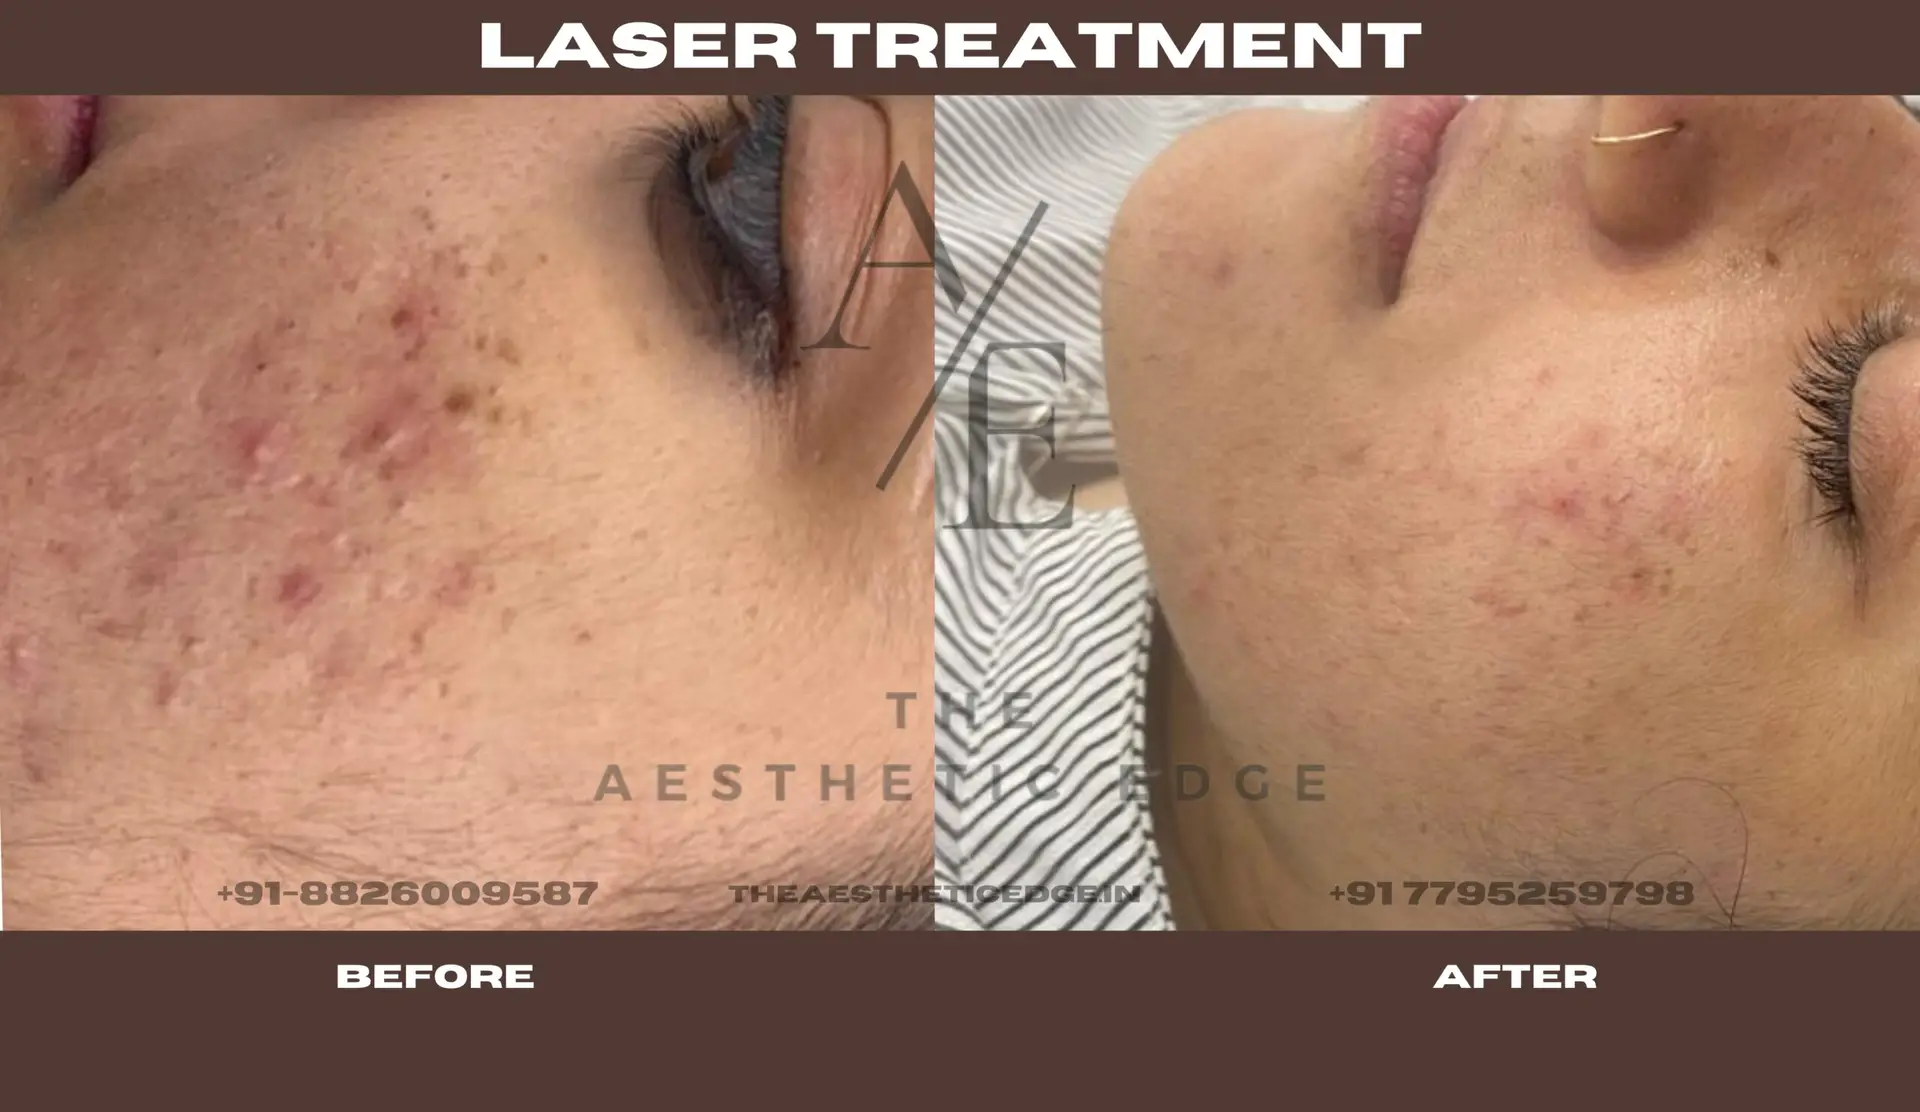 Laser treatment results